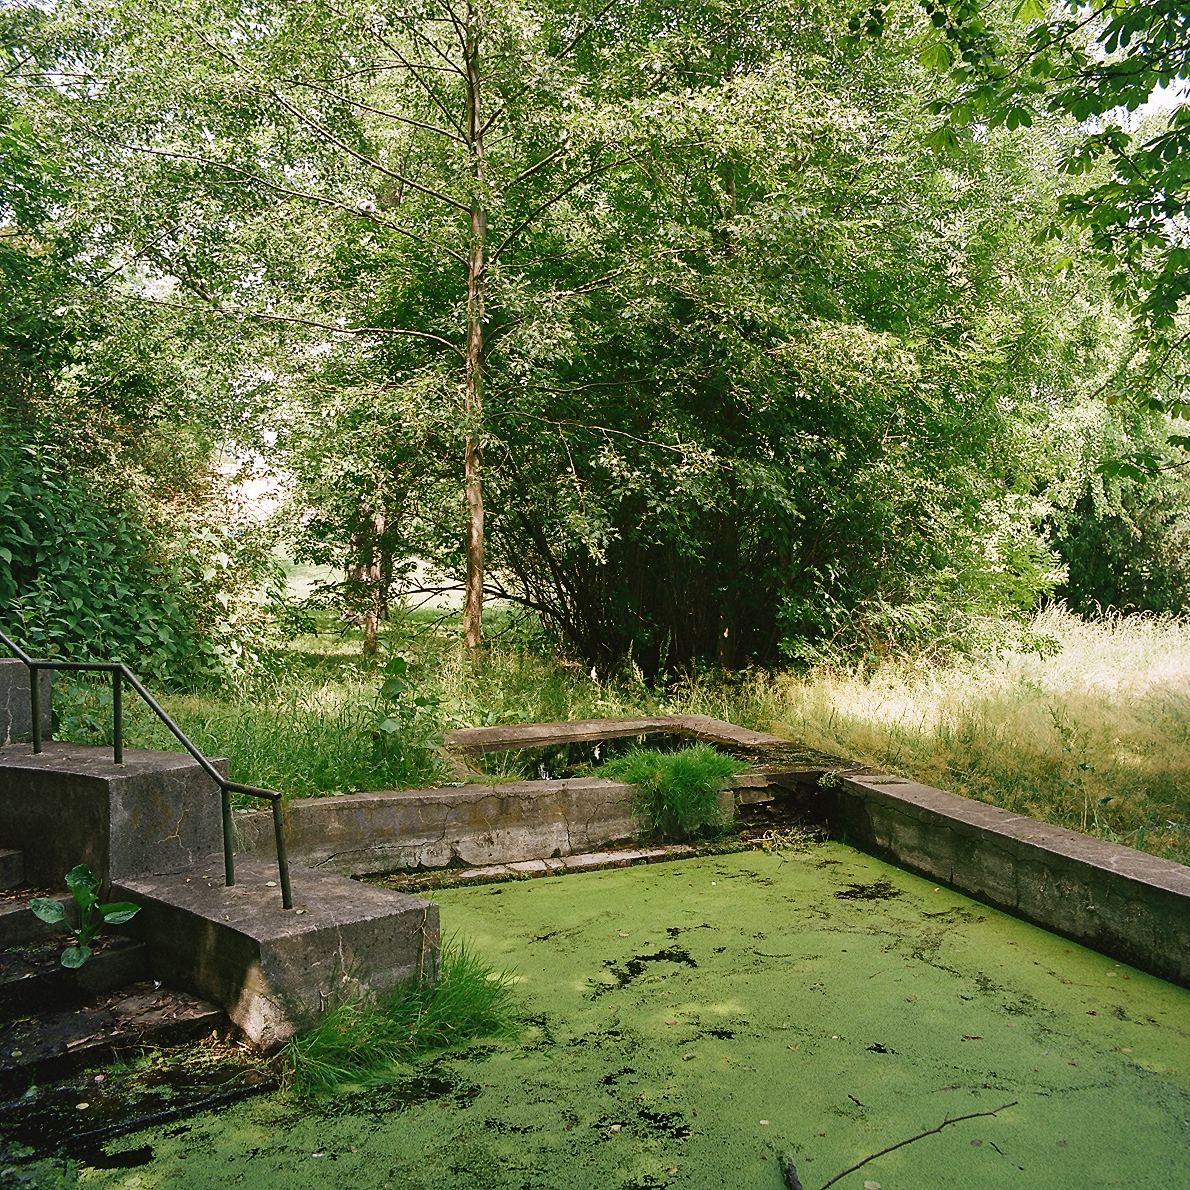 The setting of an active spring in Casimir Park, created before 1908, probably as an aquatic plant quarter in University of Warsaw first botanical garden. Water testing, renovation of the neglected architecture and replanting with aquatic plants is needed.